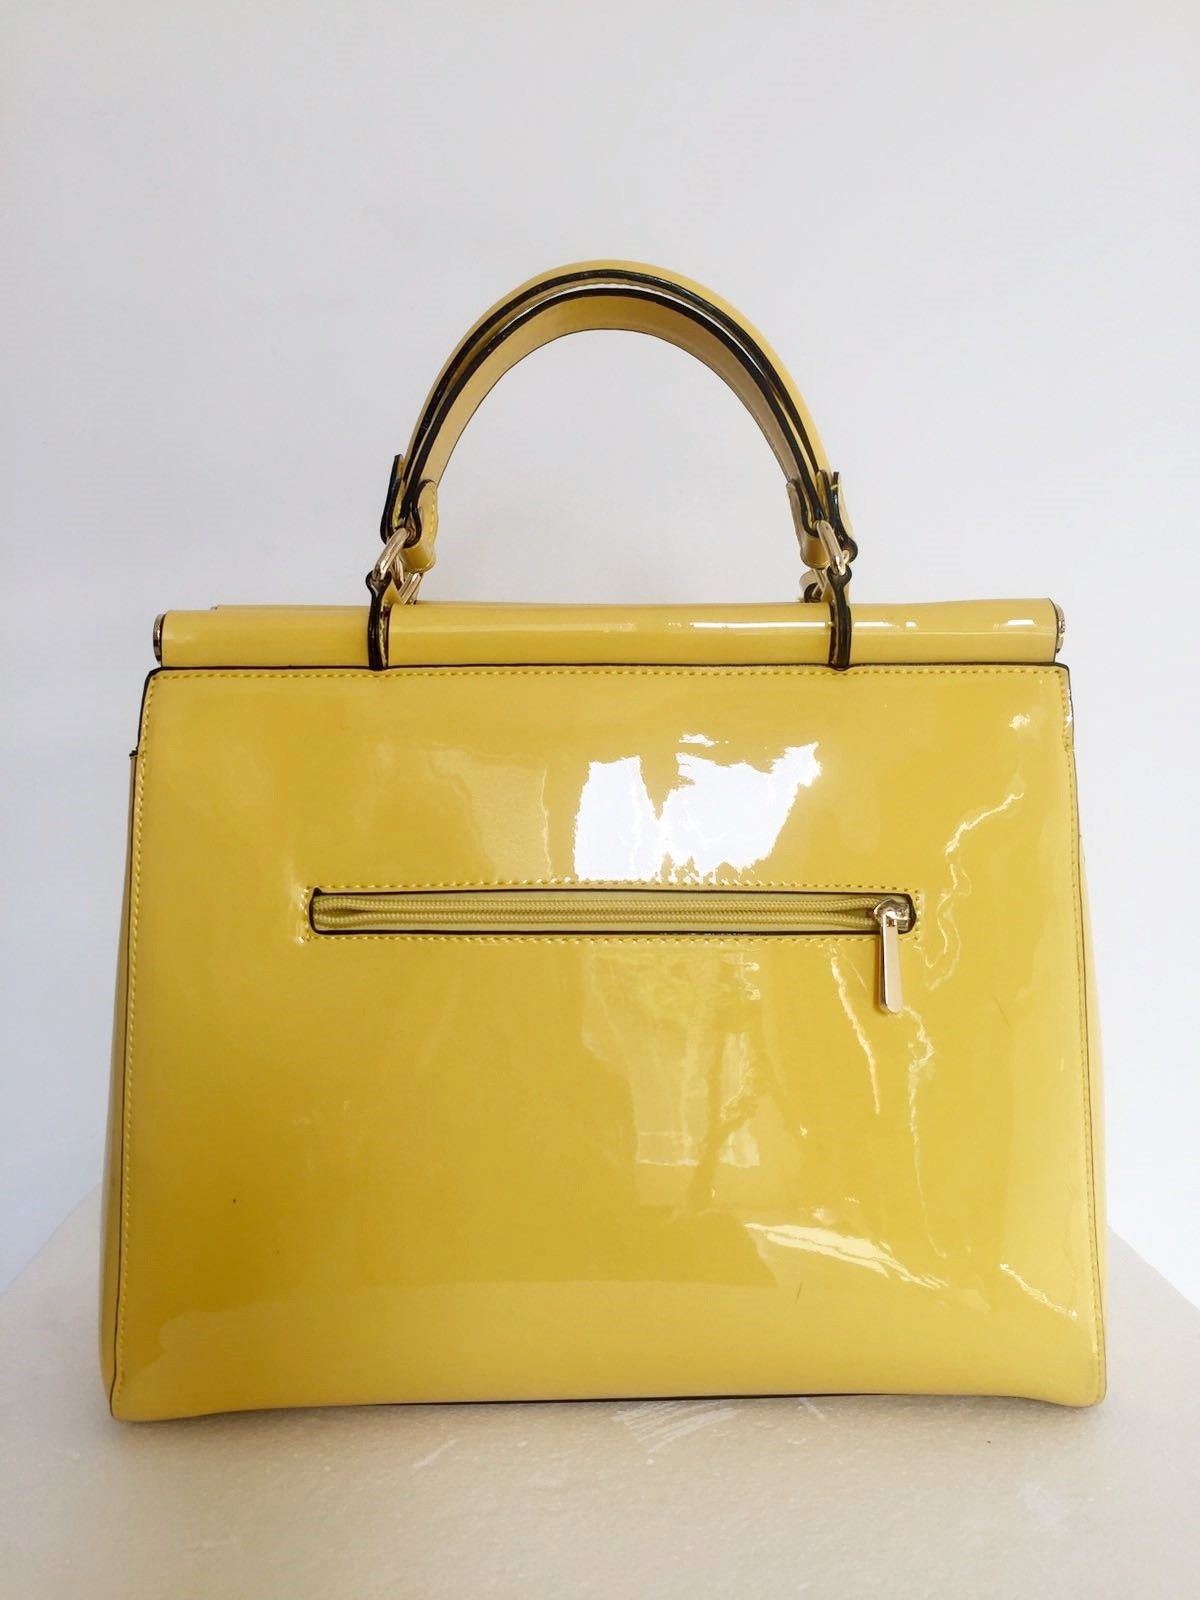 Patent leather handbag with lace Cod.1013